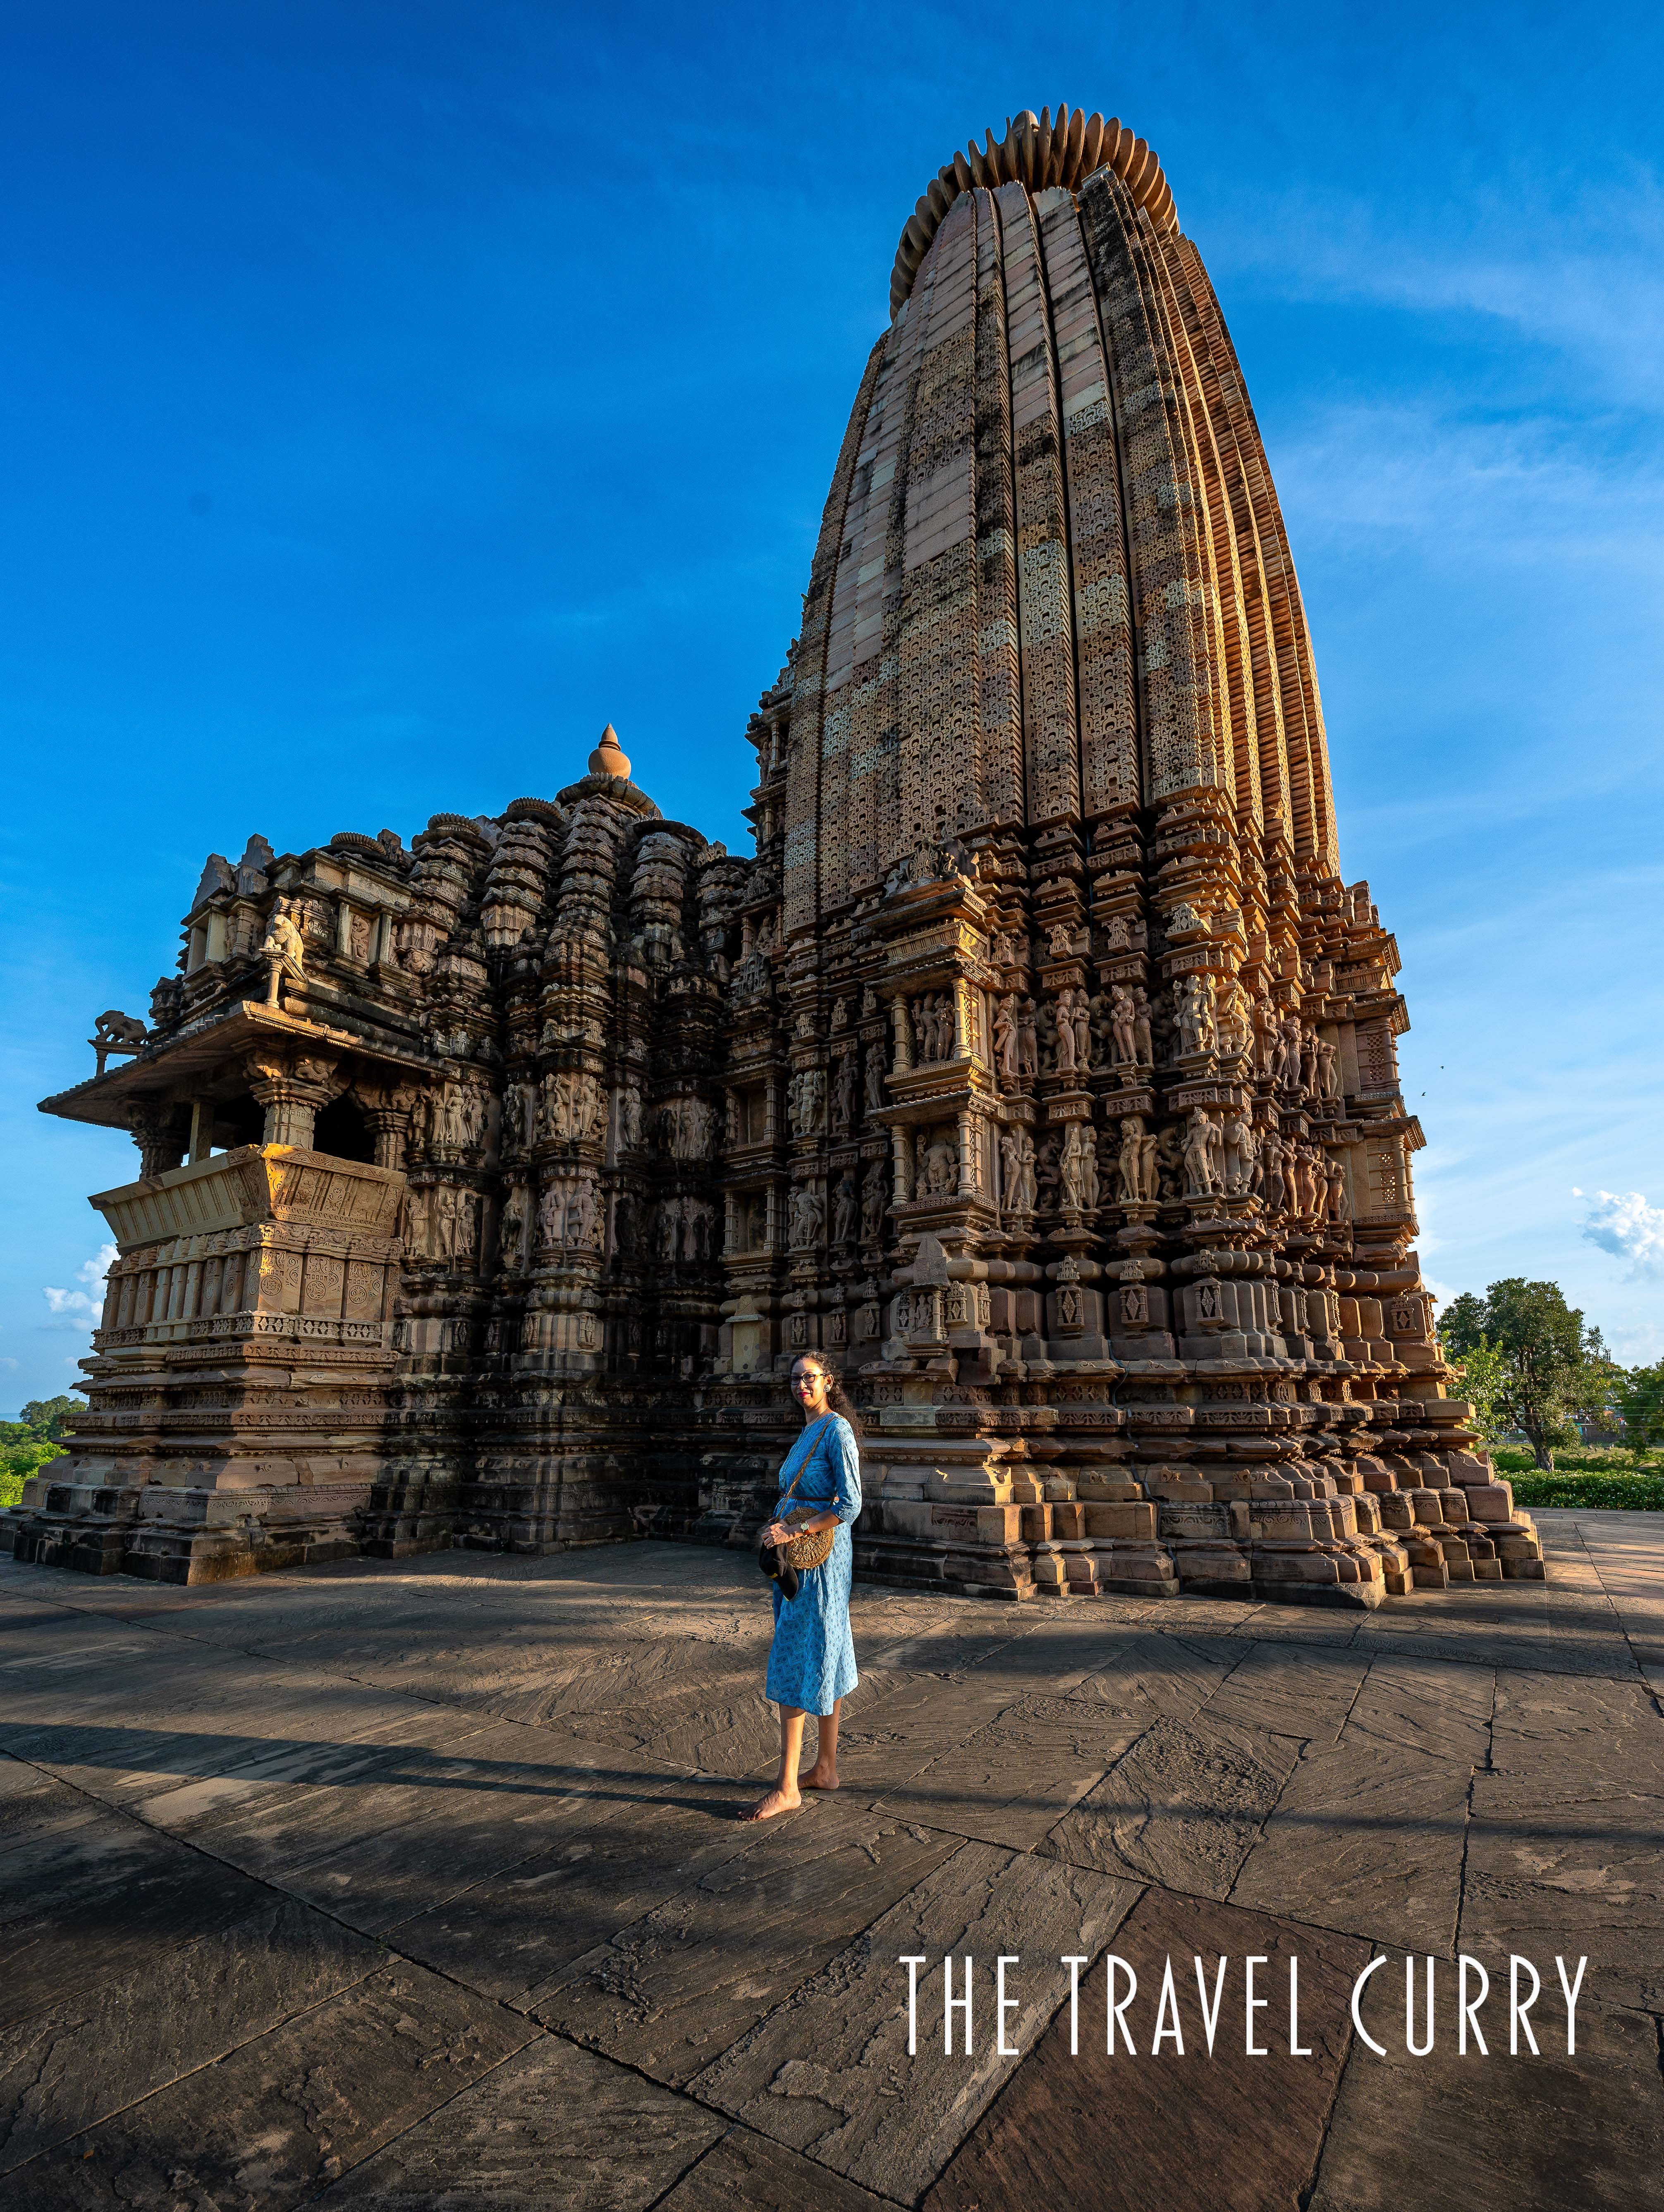 Vamana Temple in Eastern Group of Temples in Khajuraho